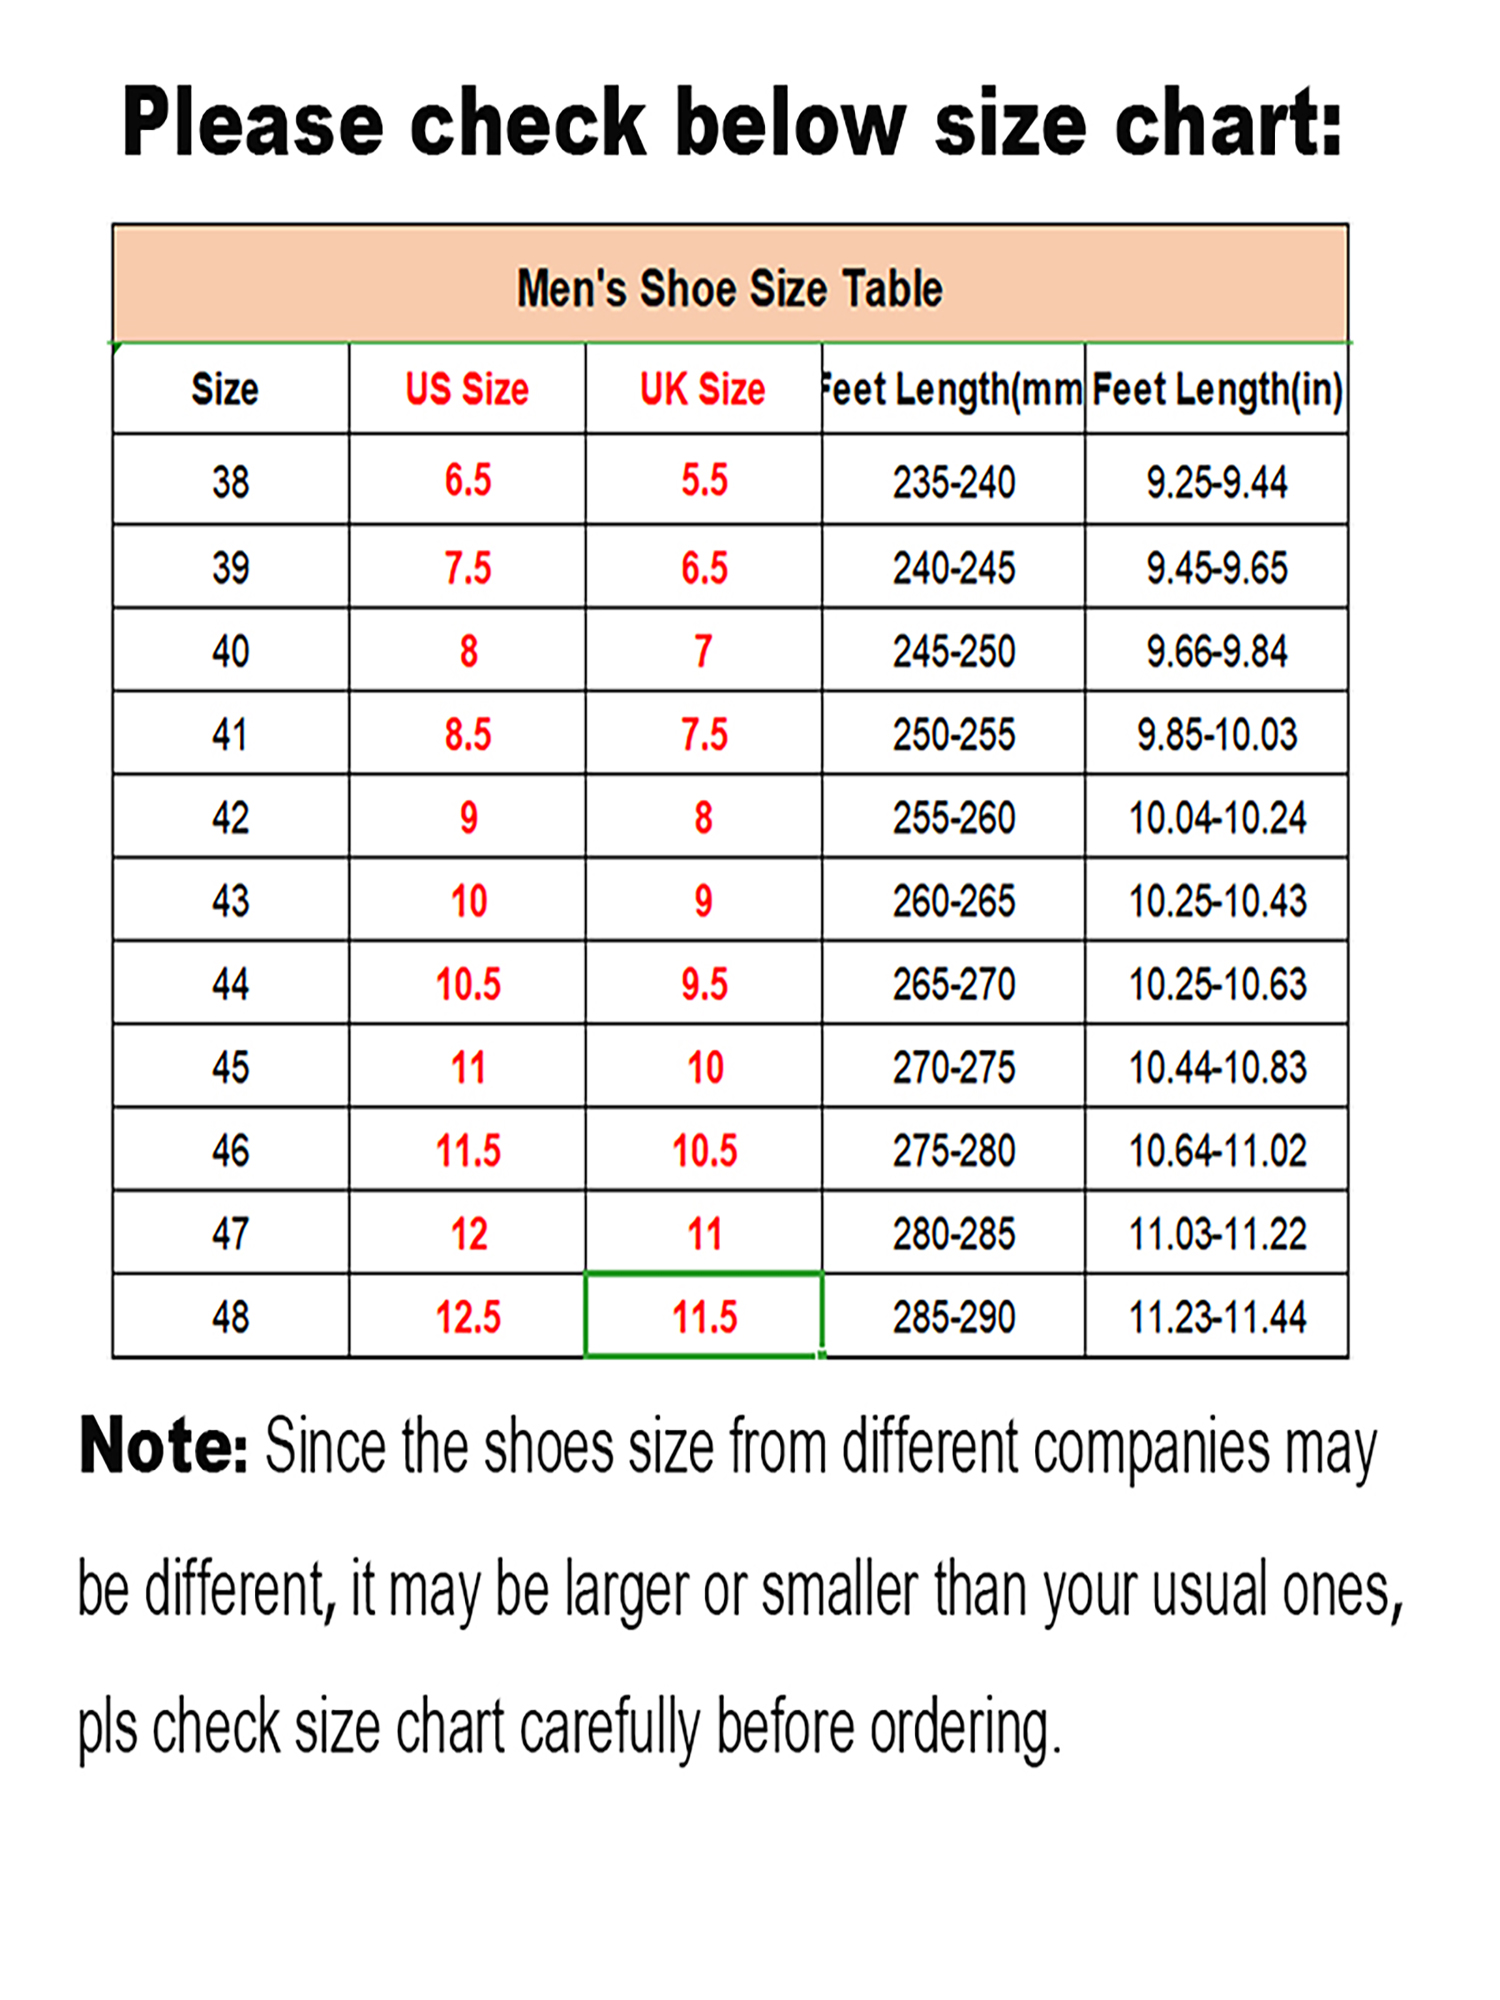 Avamo Mens Ankle Boots, Men's Casual Shoes Zipper Hand Stitching Booties Breathable Non Slip Outdoor Shoes Size 6.5-12.5 - image 2 of 4